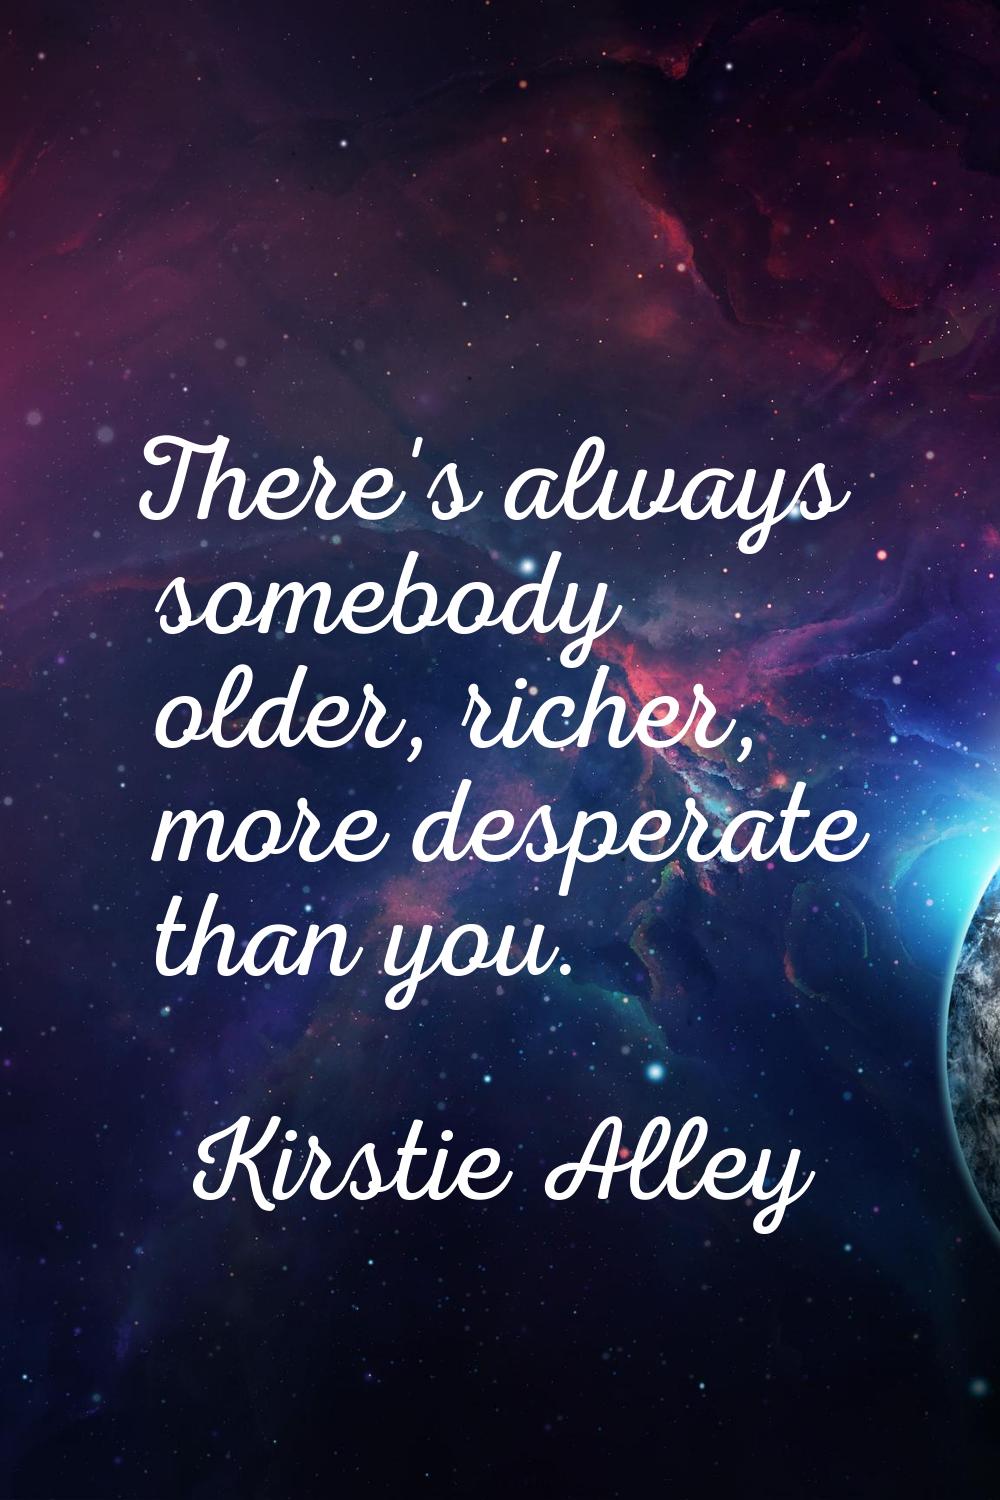 There's always somebody older, richer, more desperate than you.